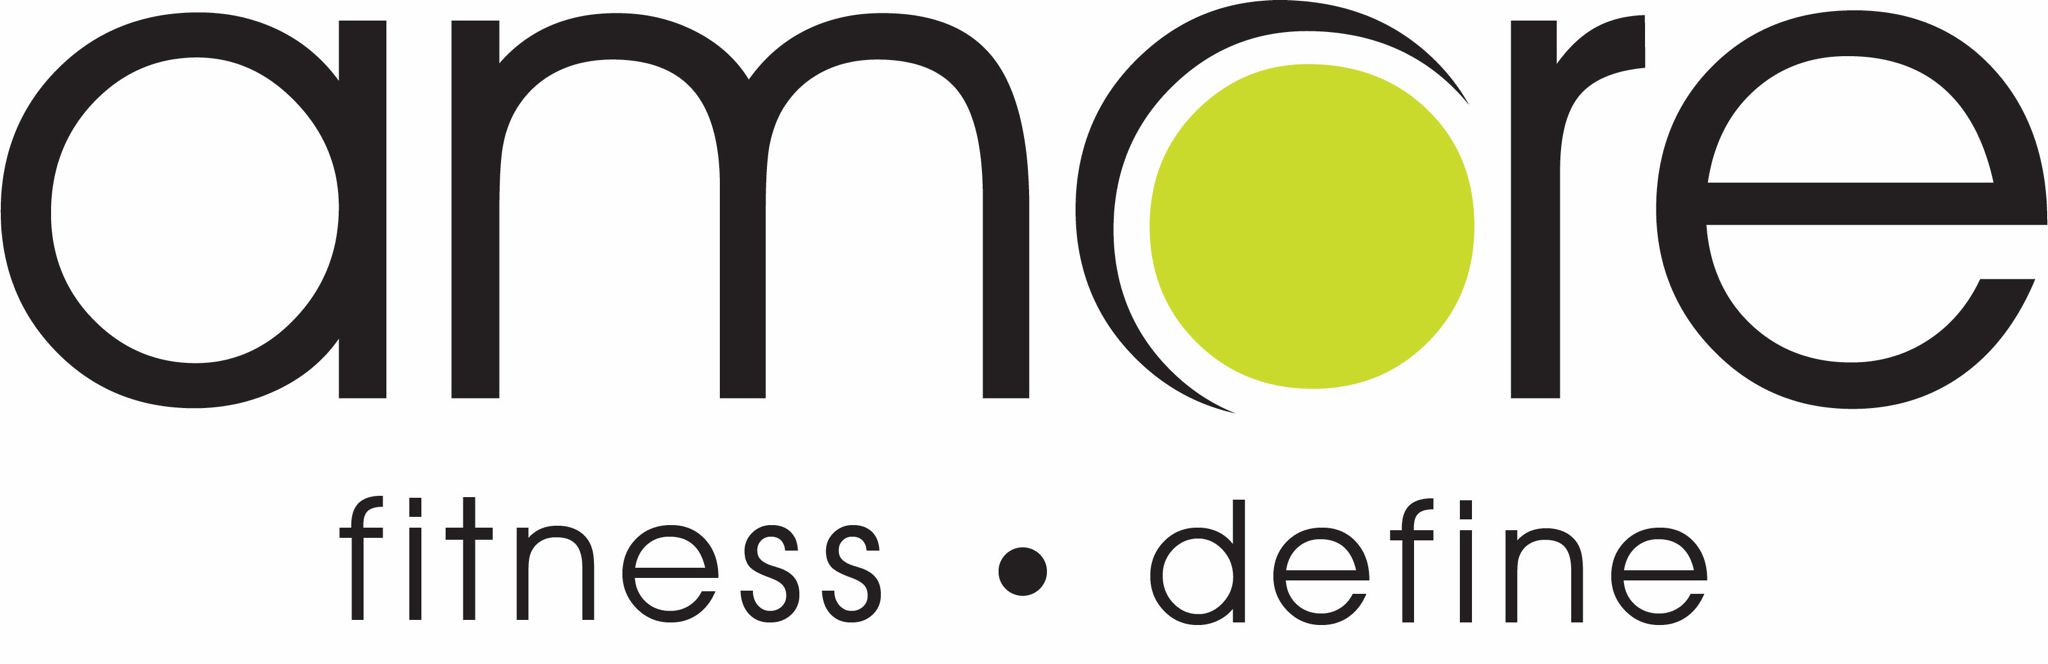 Company logo for Amore Fitness Pte. Ltd.